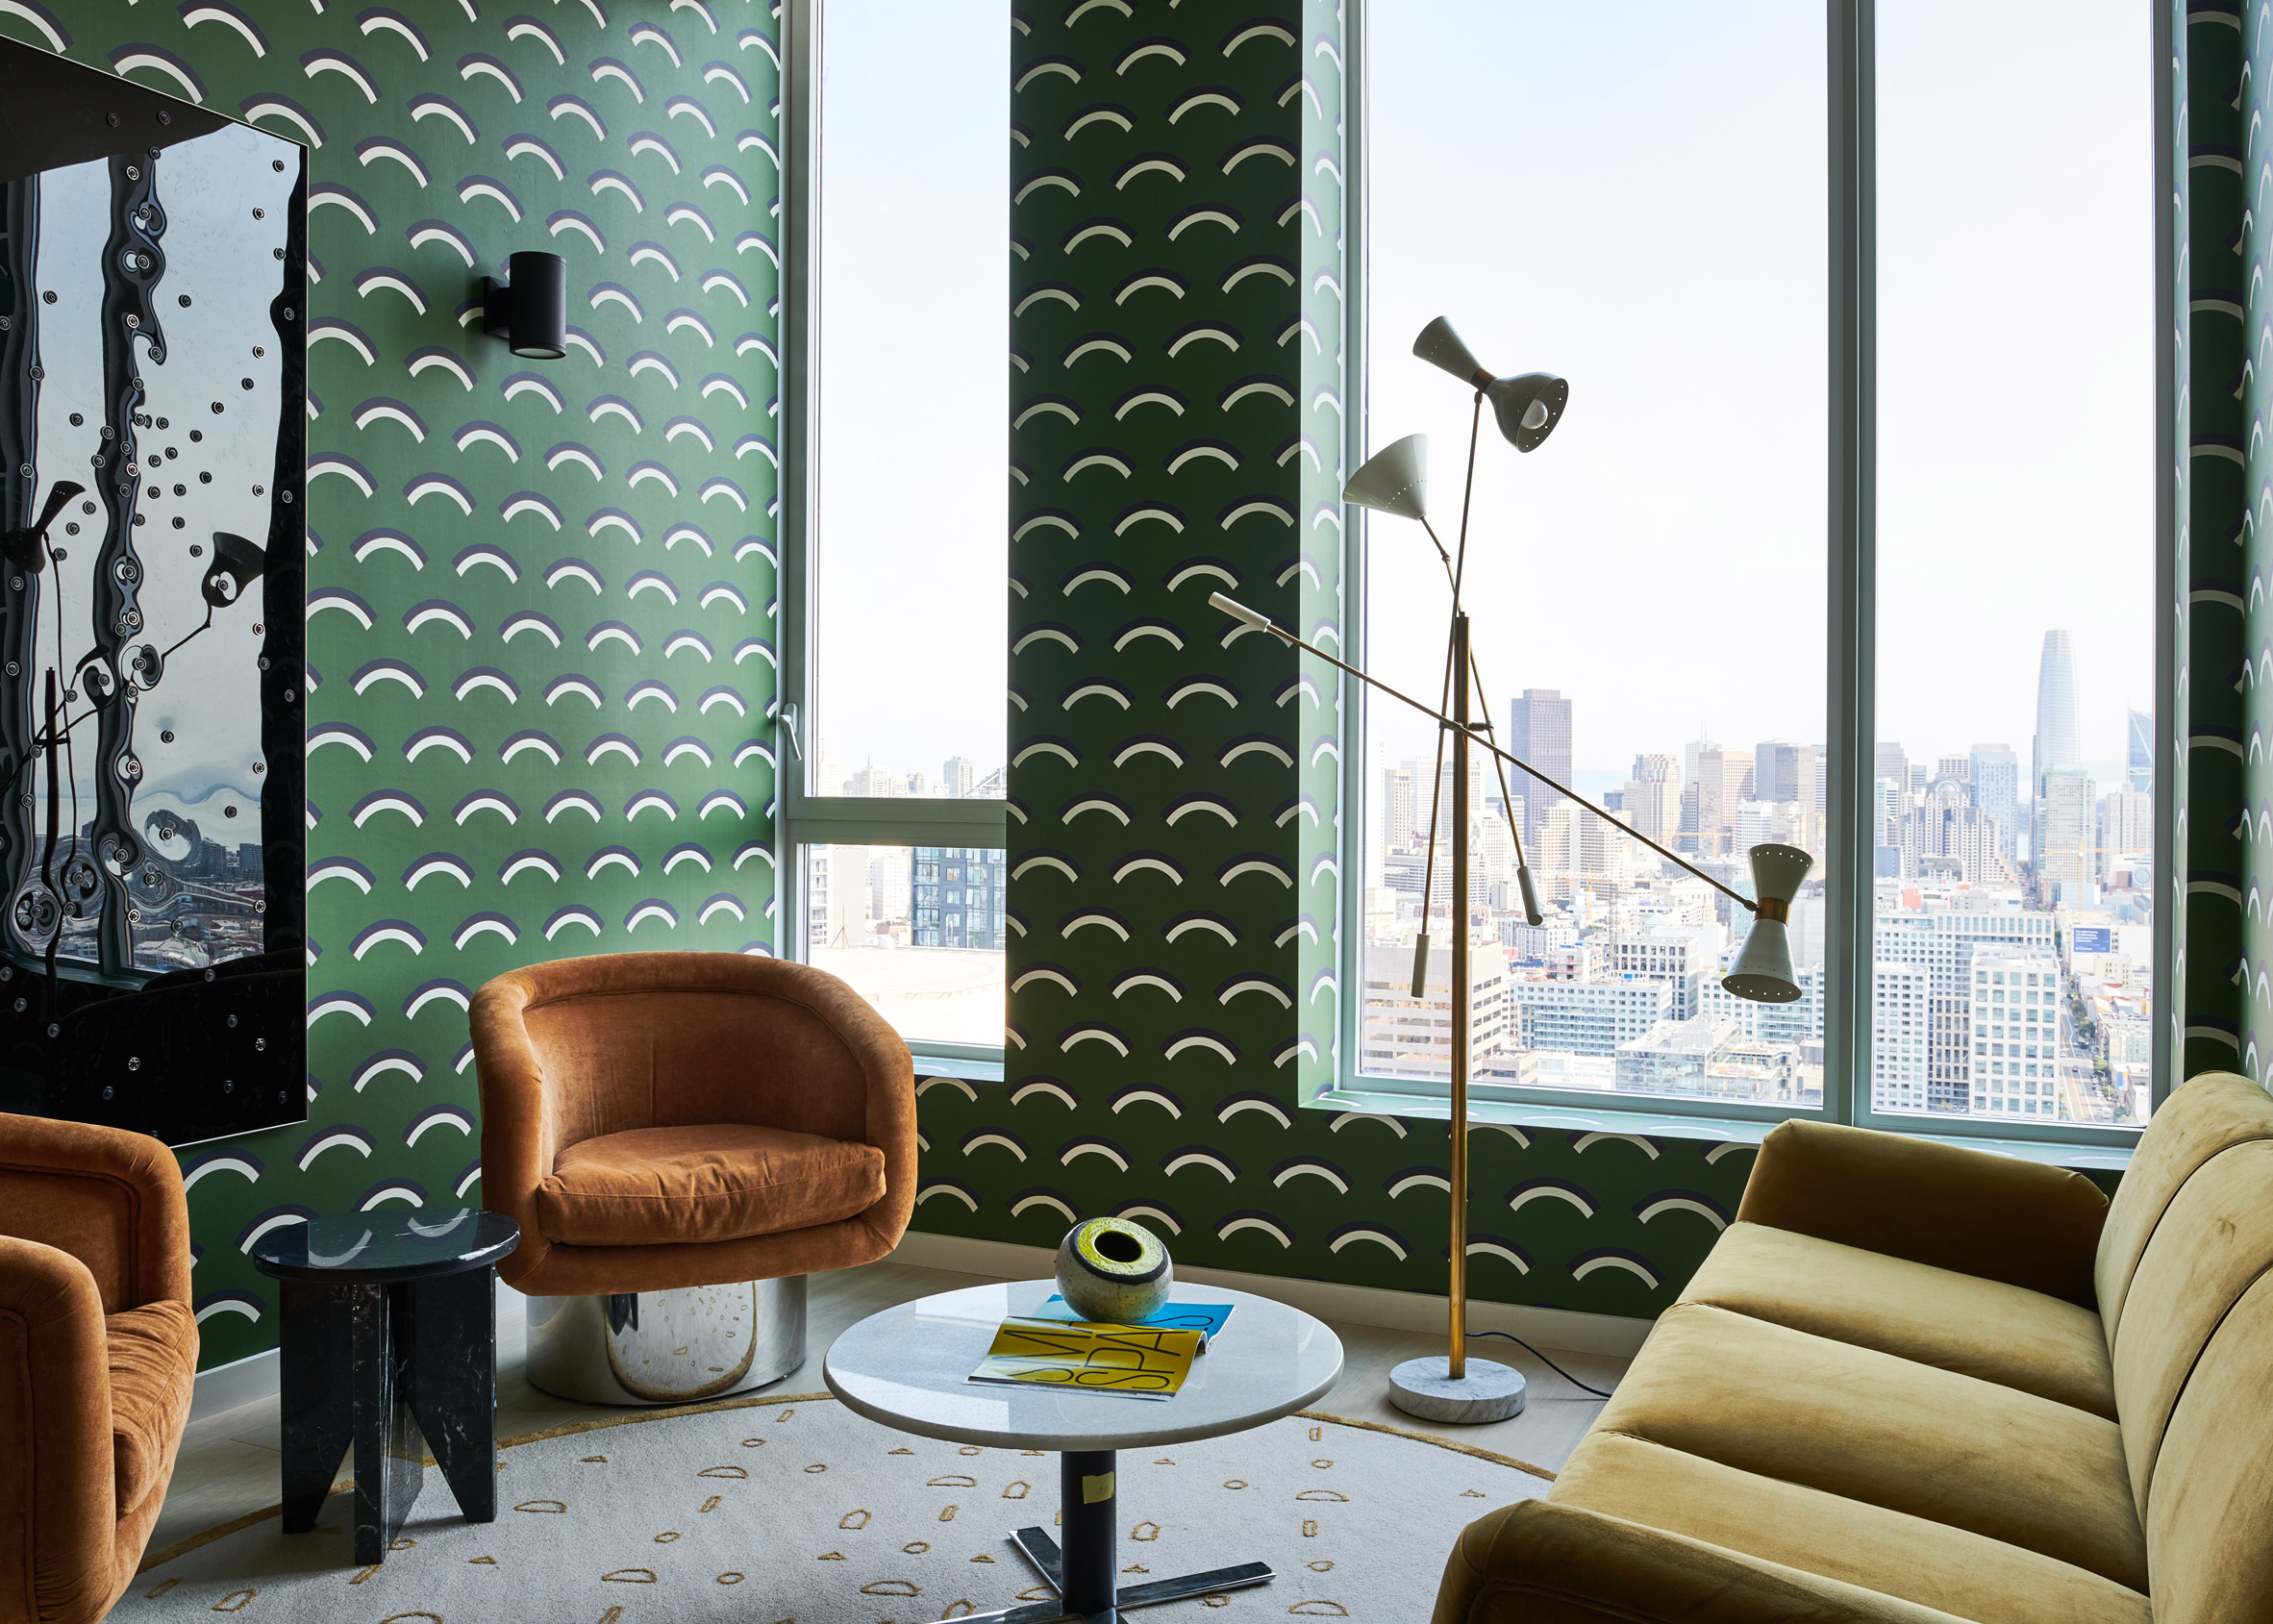 Office with green wallpaper and velvet furniture from San Francisco penthouse exhibition by Gabriel & Guillaume